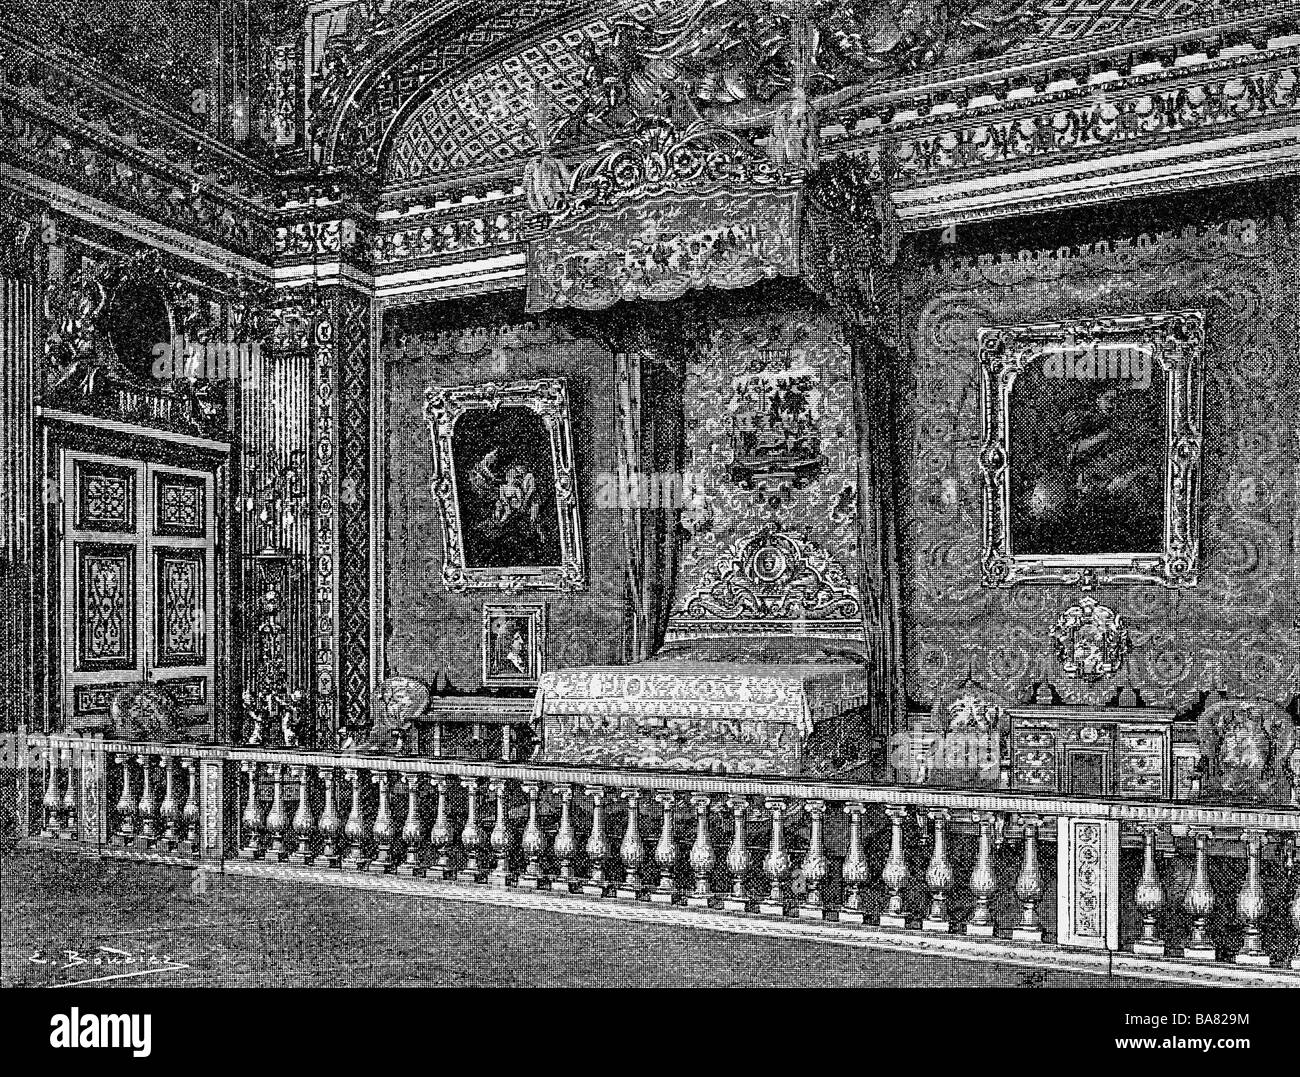 architecture, castles, Versailles Palace, interior view, sleeping room of King Louis XIV, wod engraving, 19th century, bed, Bourbon, historic, historical, Stock Photo